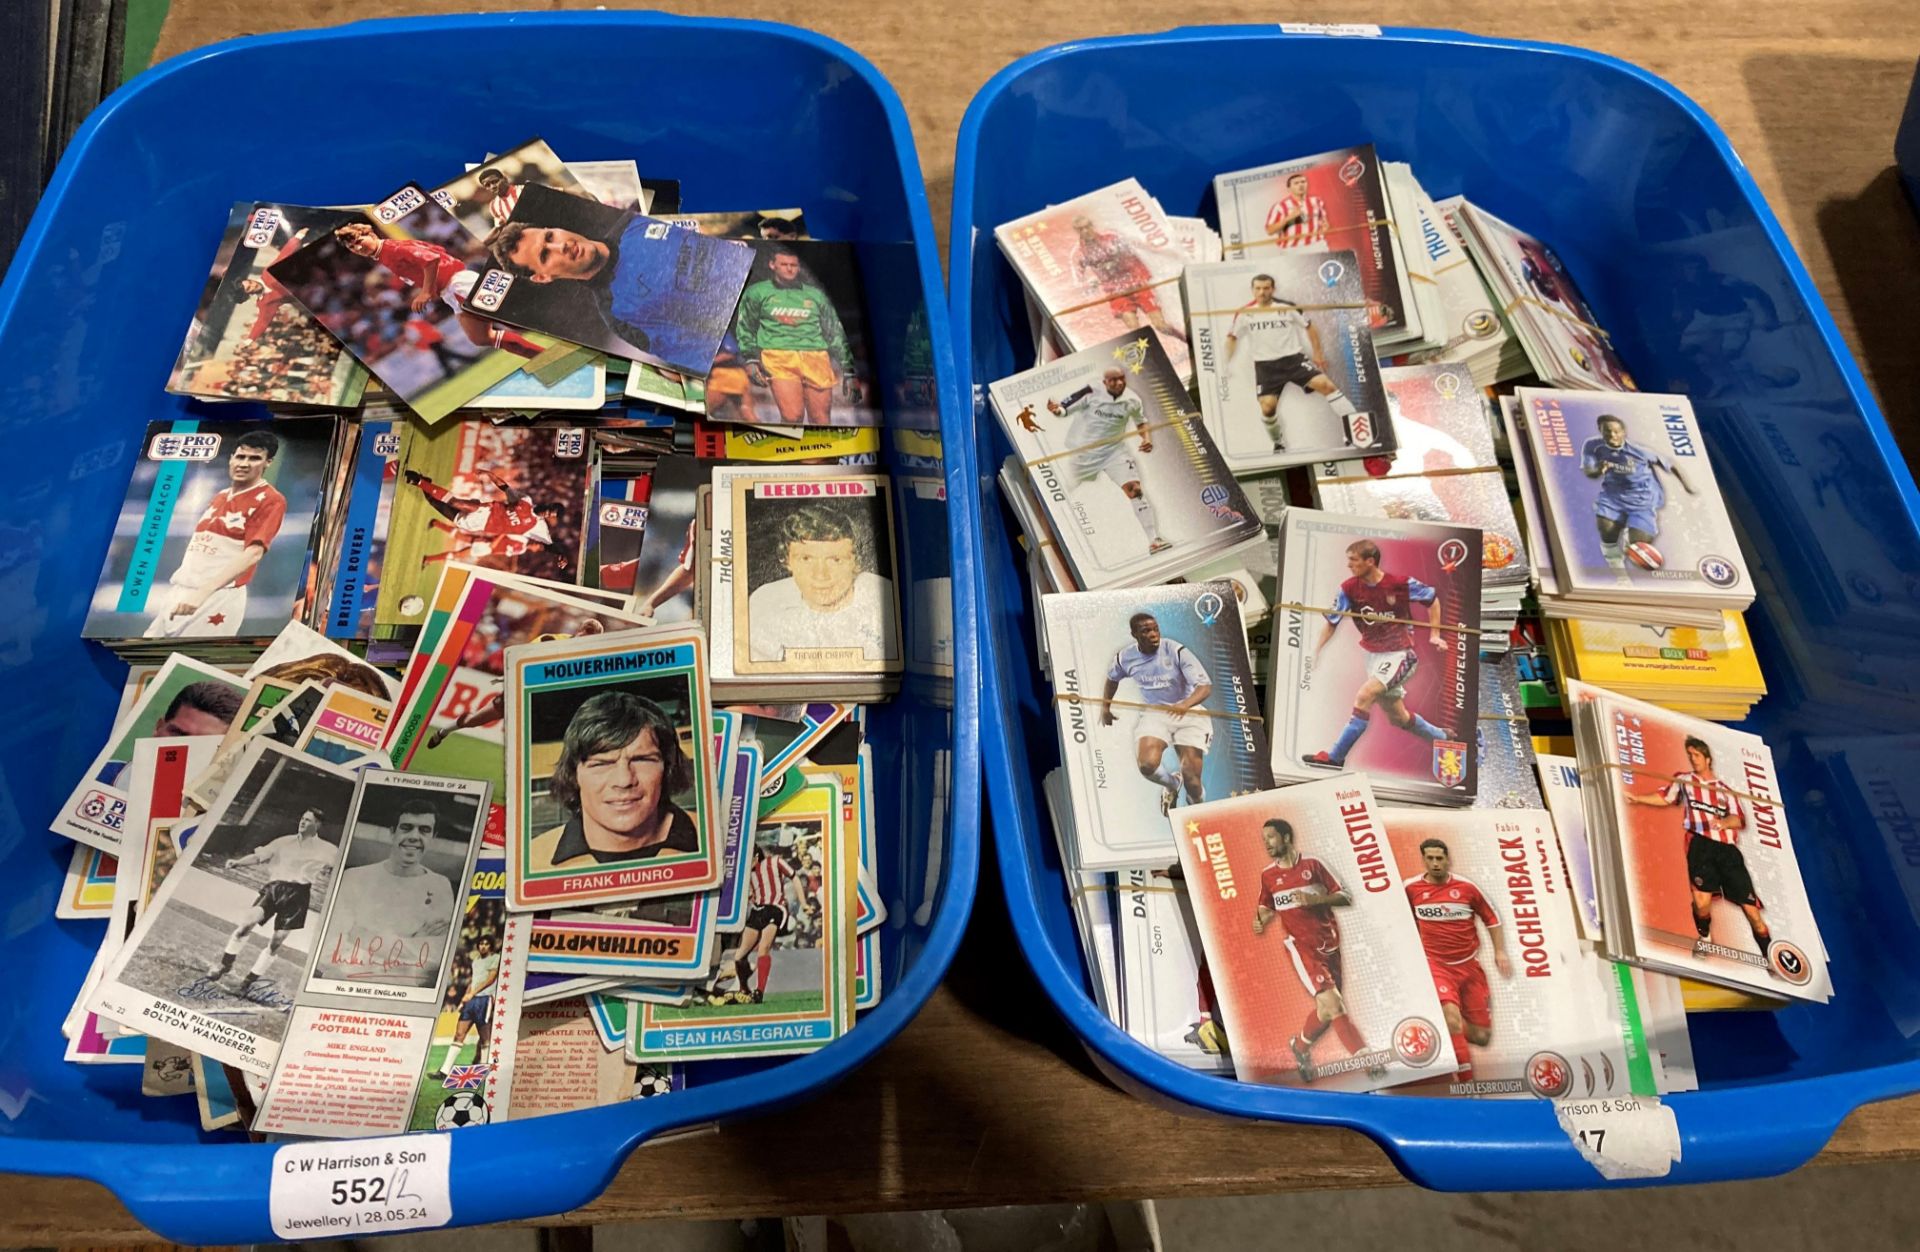 Contents to two blue plastic trays - a large quantity of football trading cards including Topps